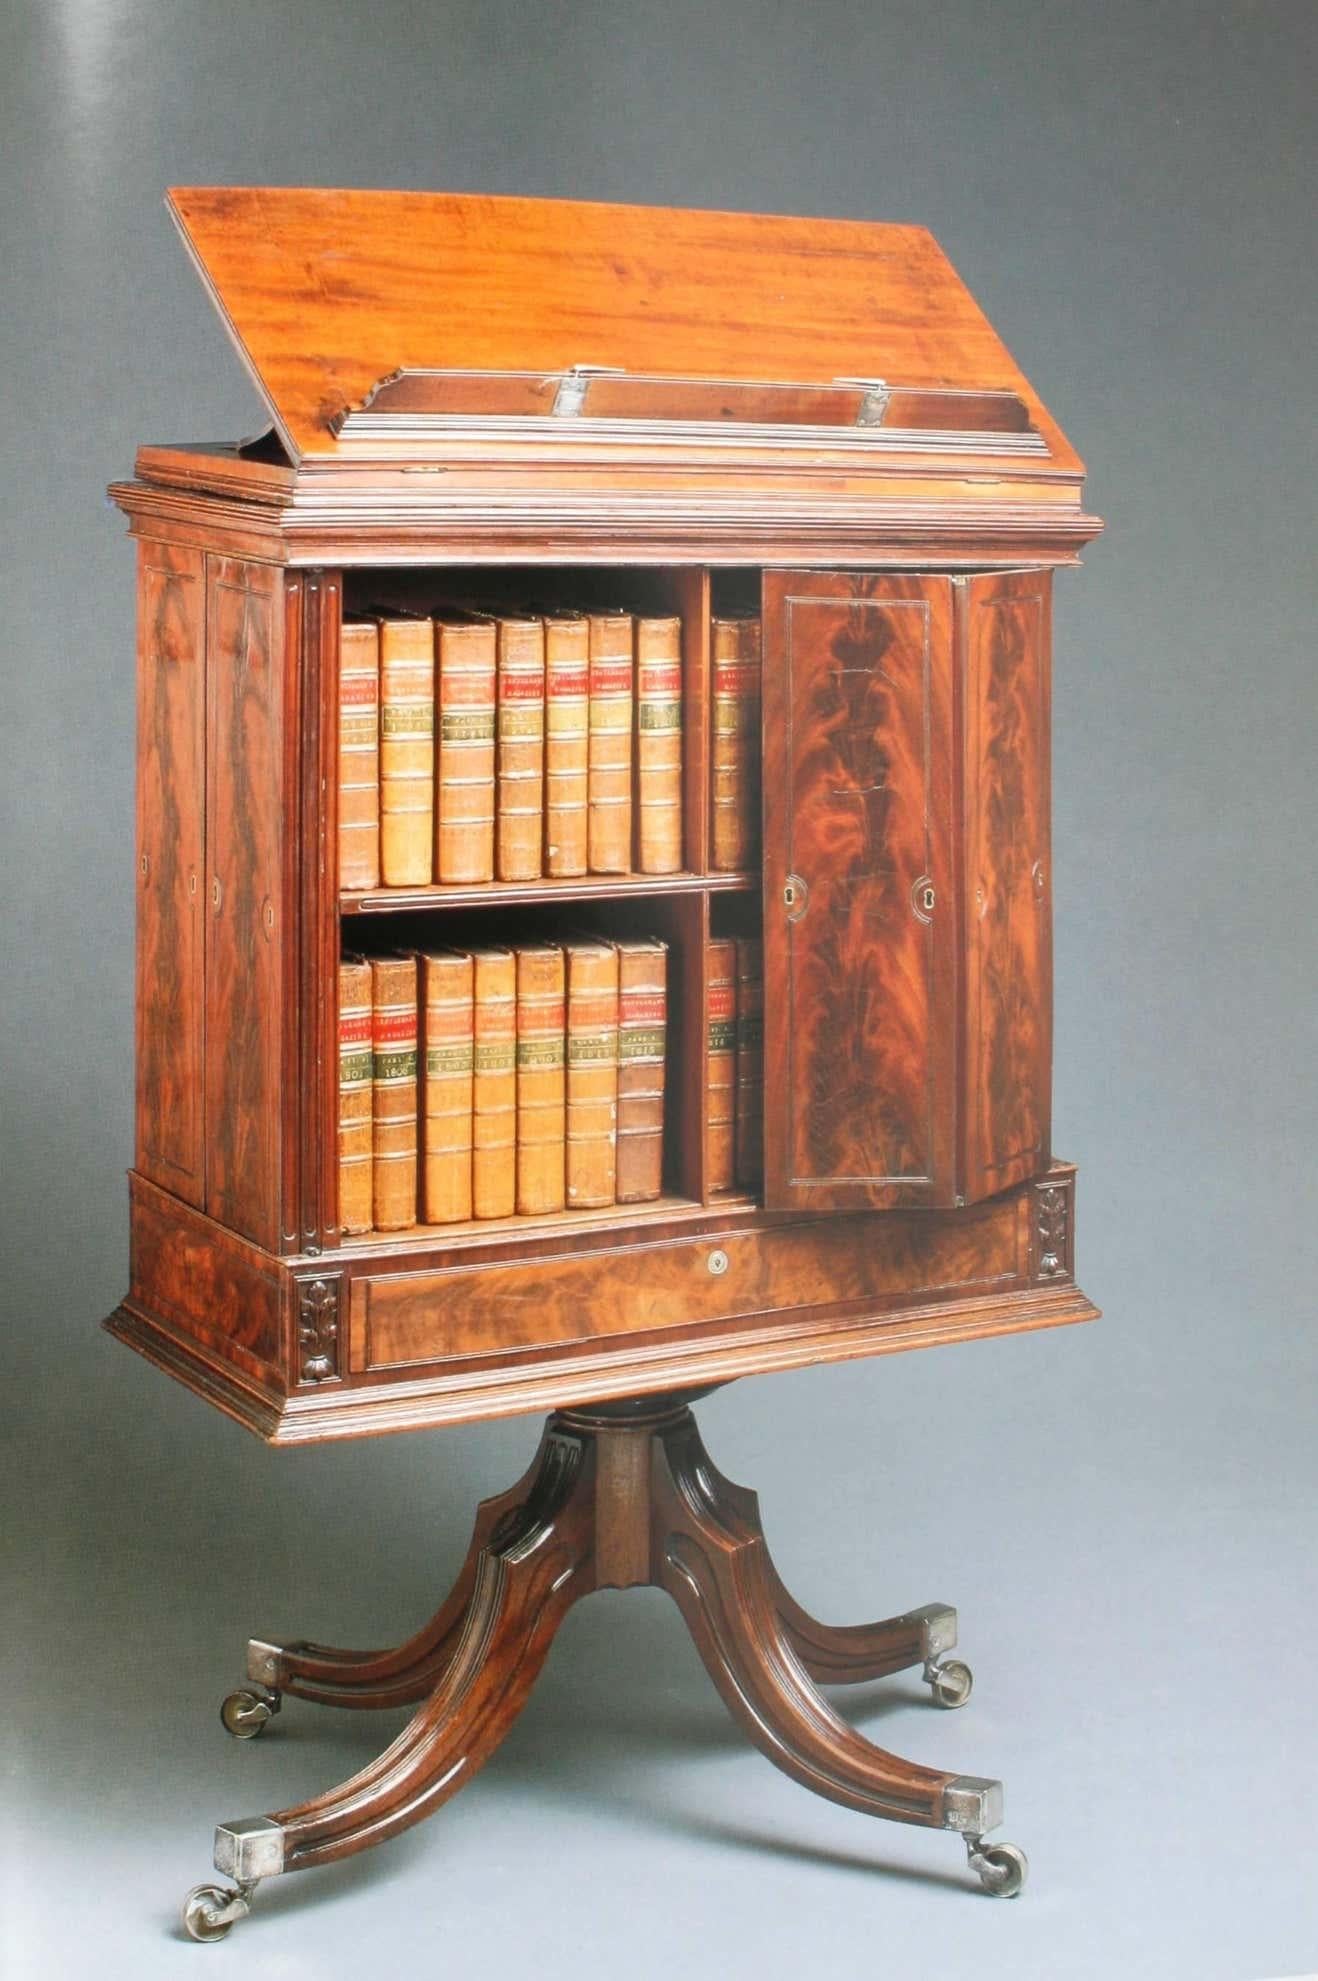 American Sotheby's, the Arthingworth Collection, Important English Furniture For Sale